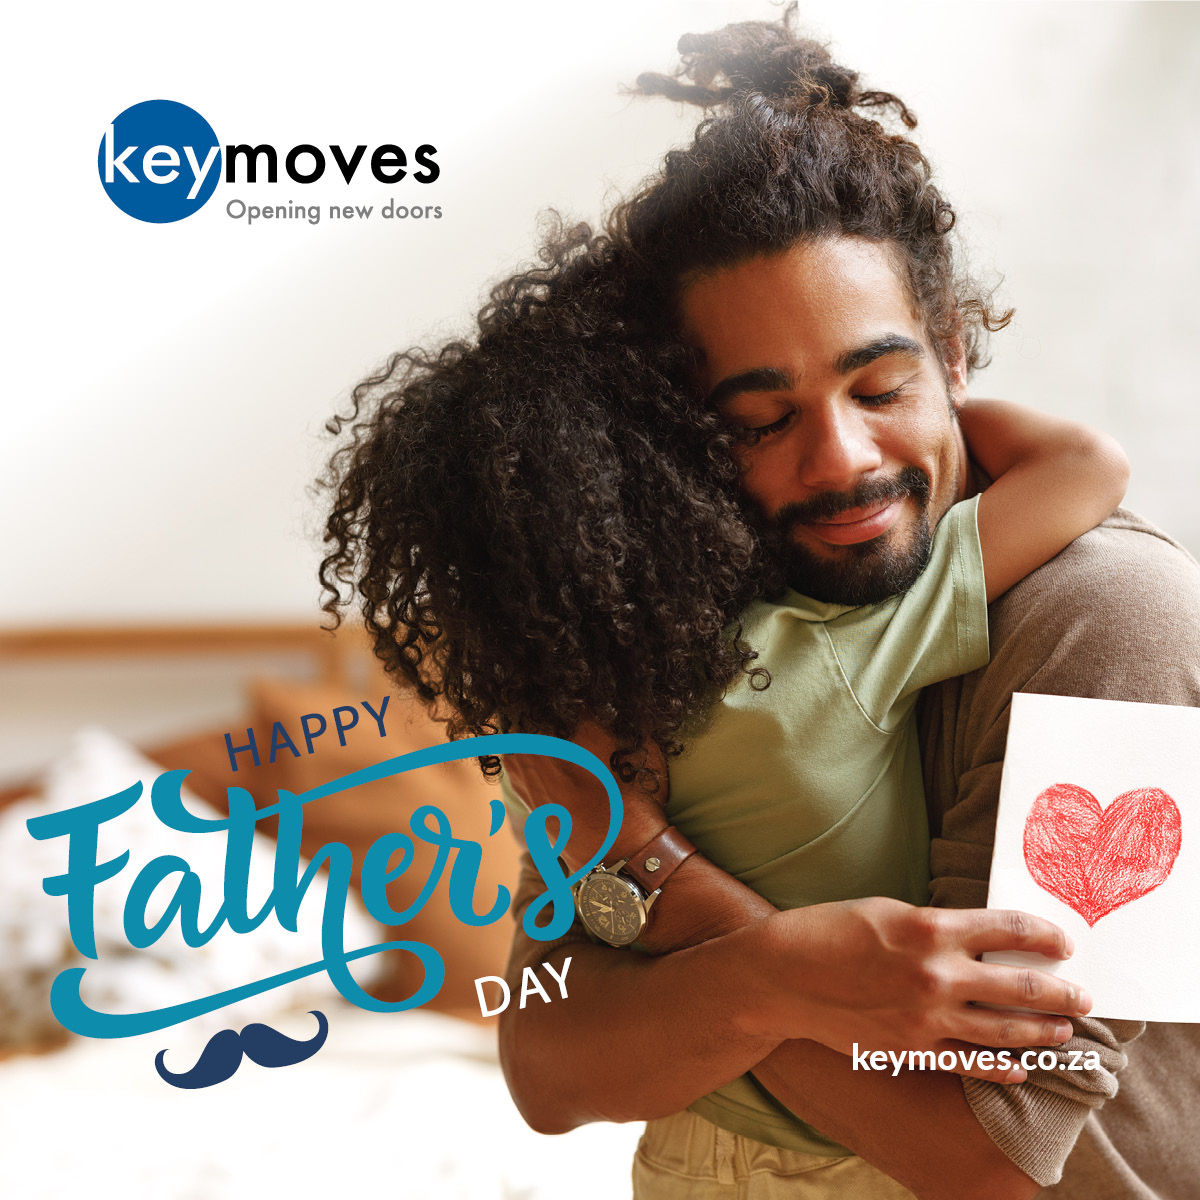 Celebrate Father's Day! Show your dad how much you appreciate him by giving him gifts and spoils.

keymoves.co.za
 
#keymoves #moving #relocationSA #movingservices #corporatemoves #residentialmoves #packingservices #relocating #movers